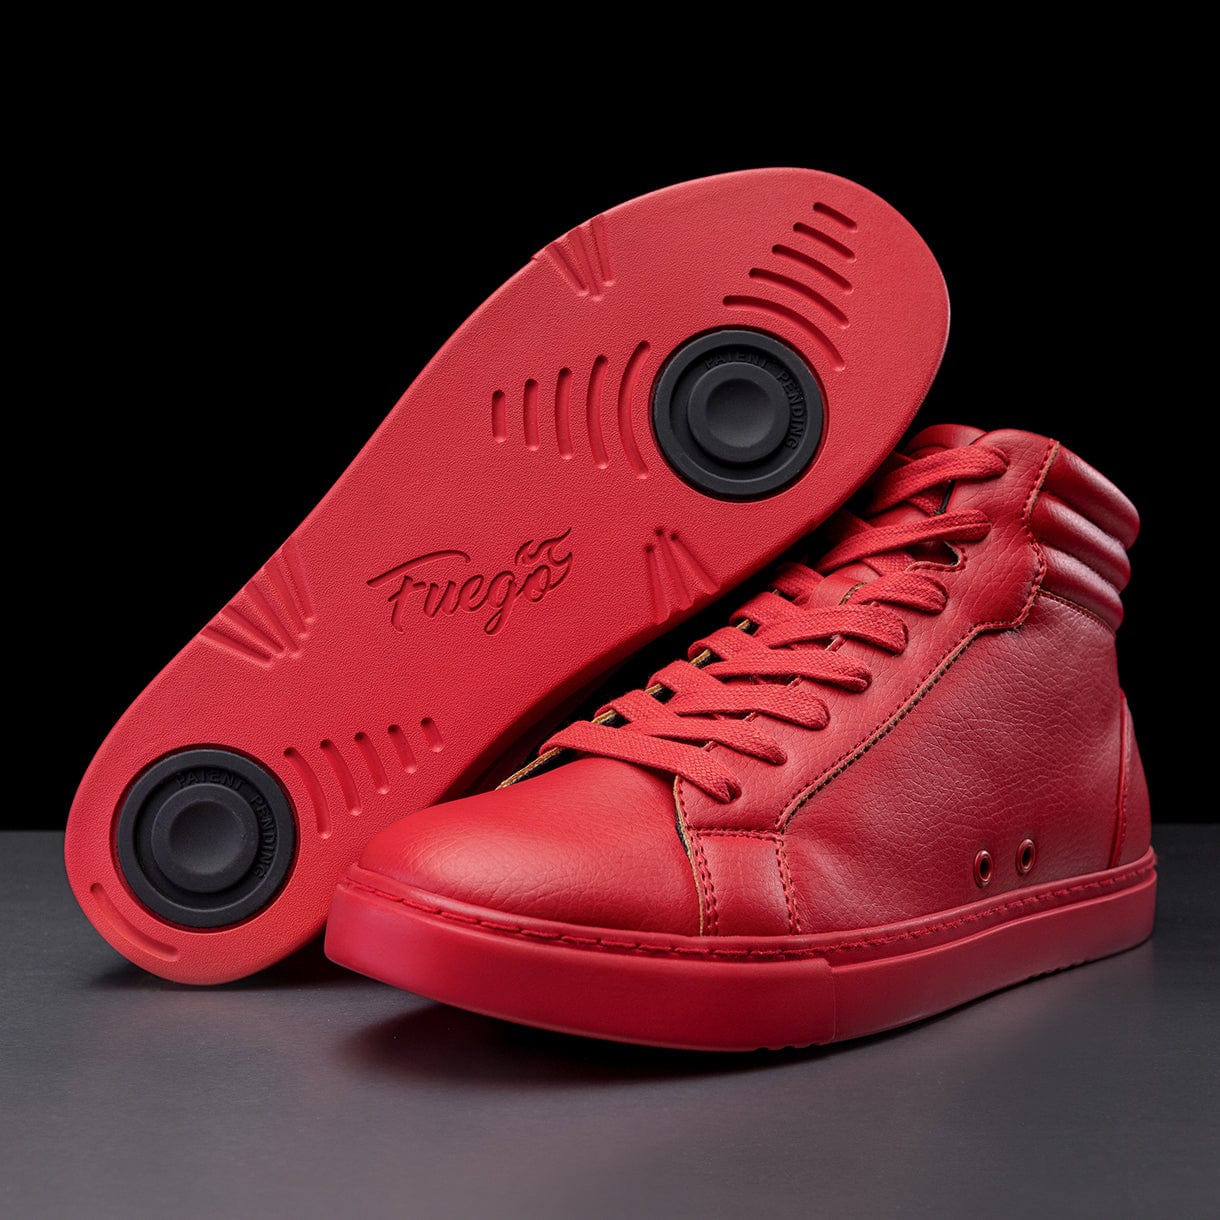 Fuego | The World's Best Dance Sneakers – Fuego, Inc.